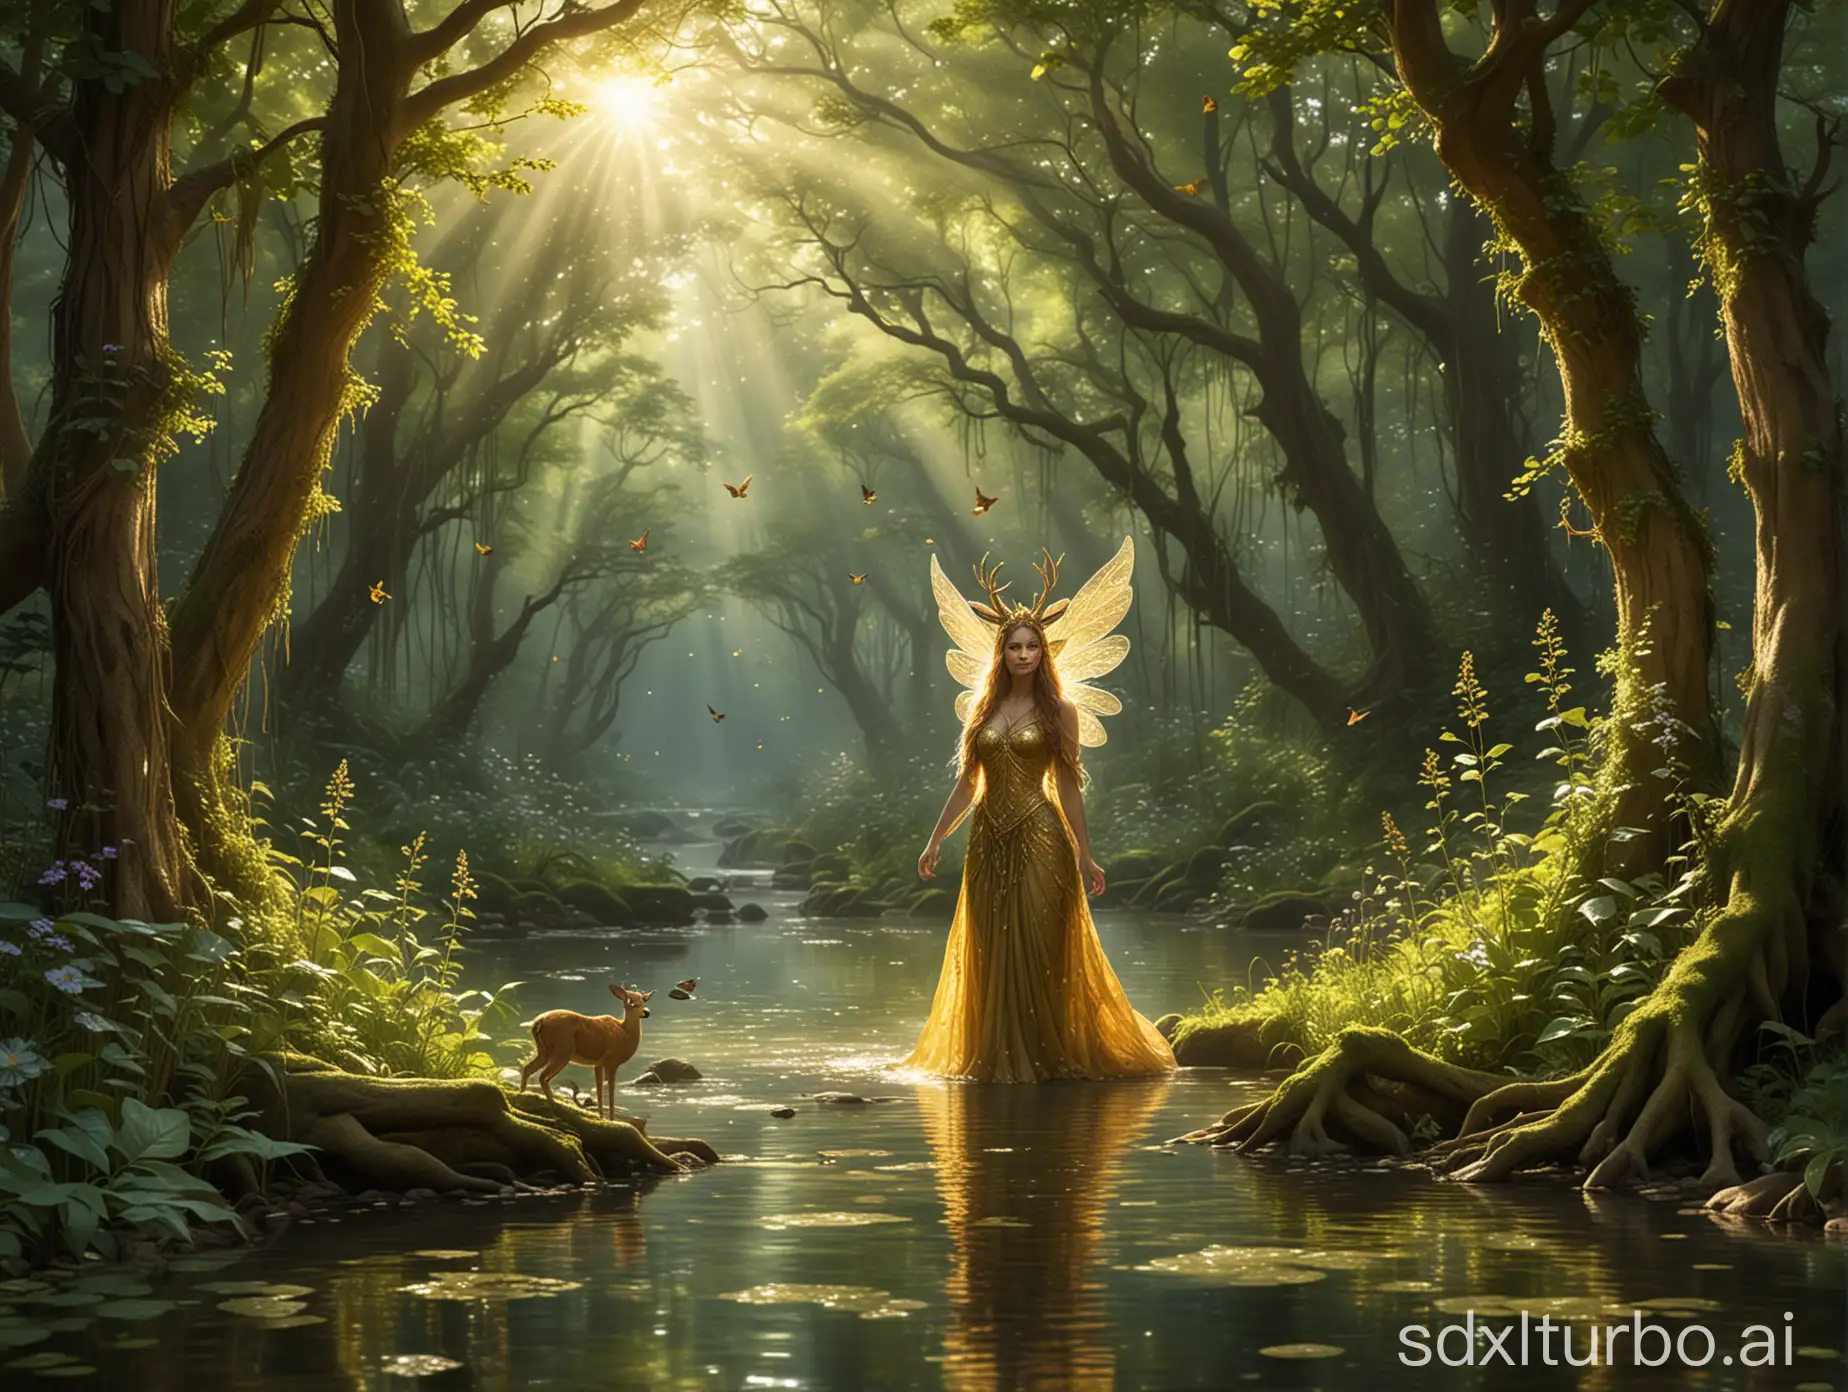 Tranquil-Forest-Spirit-Dancing-Amid-Ancient-Trees-in-Soft-Golden-Light